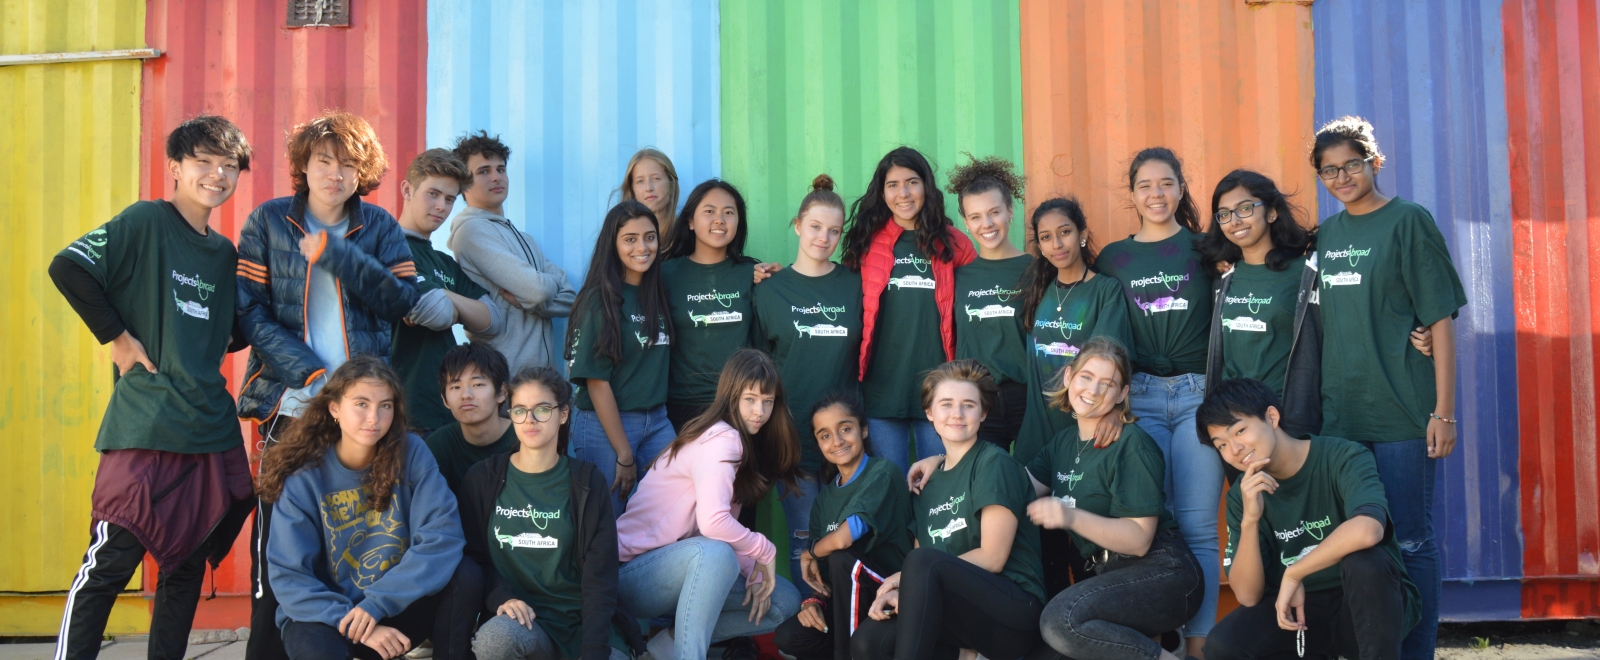 High school students volunteering abroad on Projects Abroad’s programs for 15 year olds.